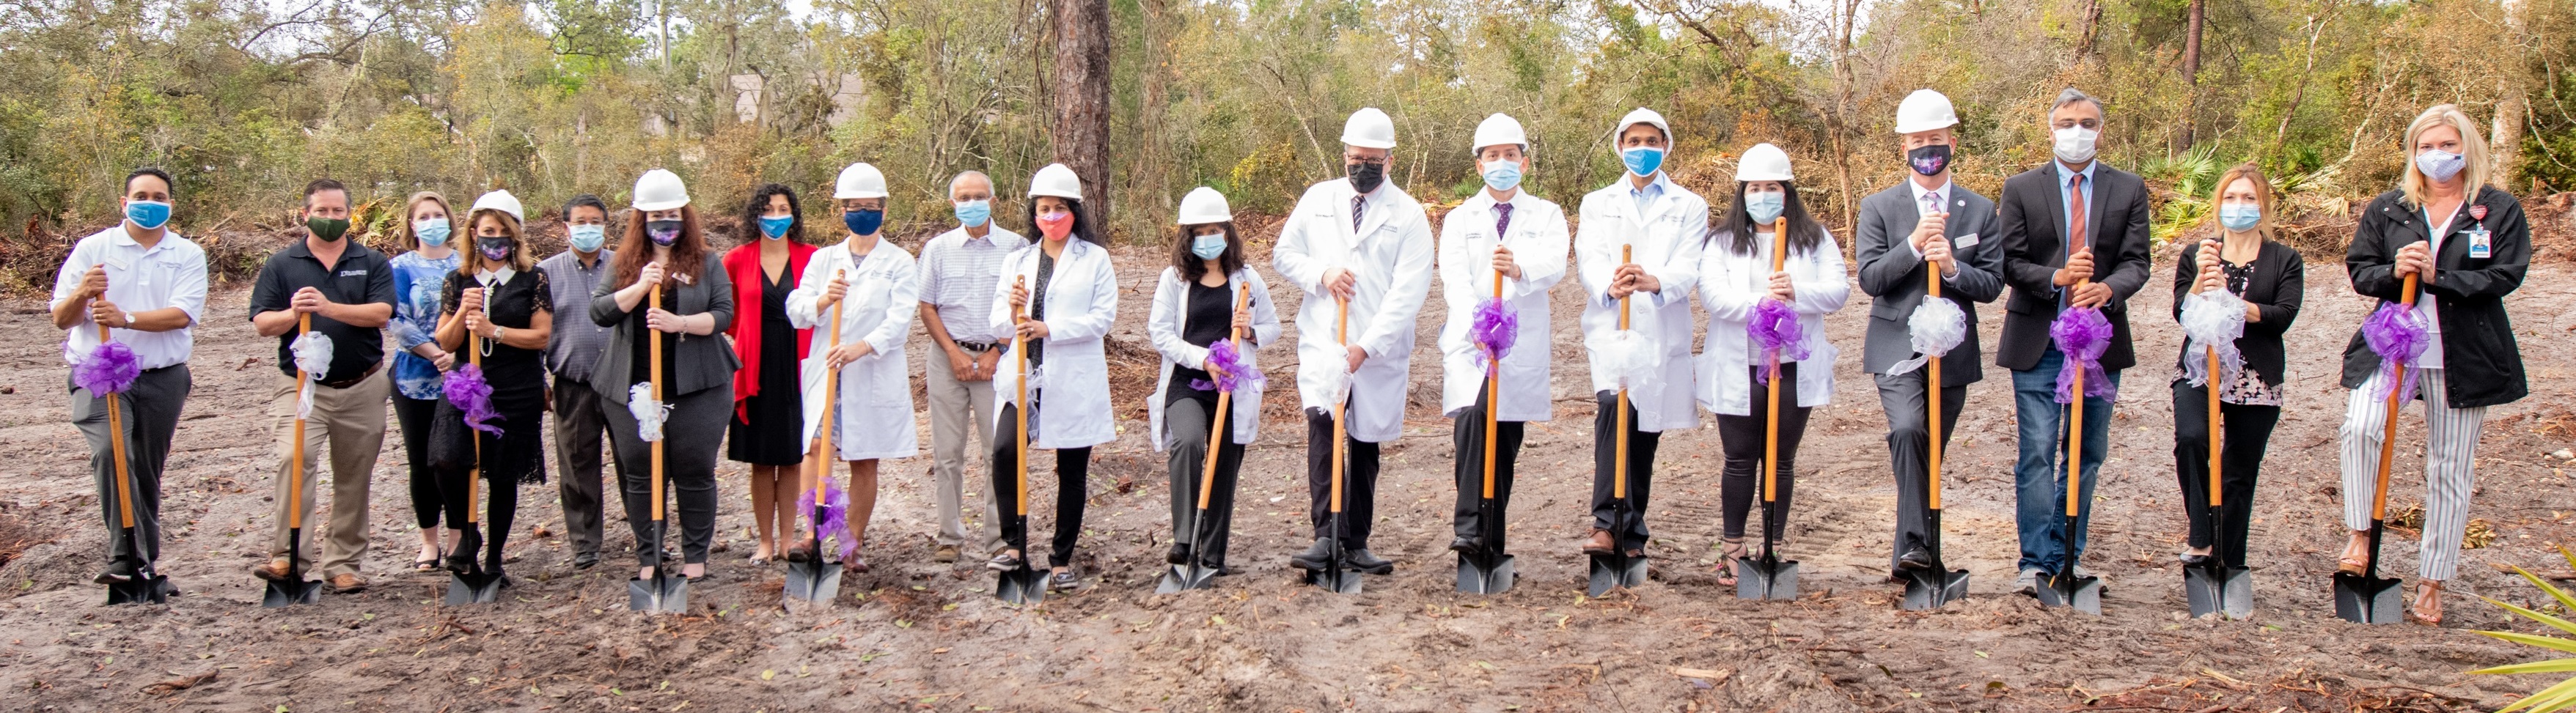 Florida Cancer Specialists physicians and staff celebrate the start of construction on the new Orange City Cancer Center.